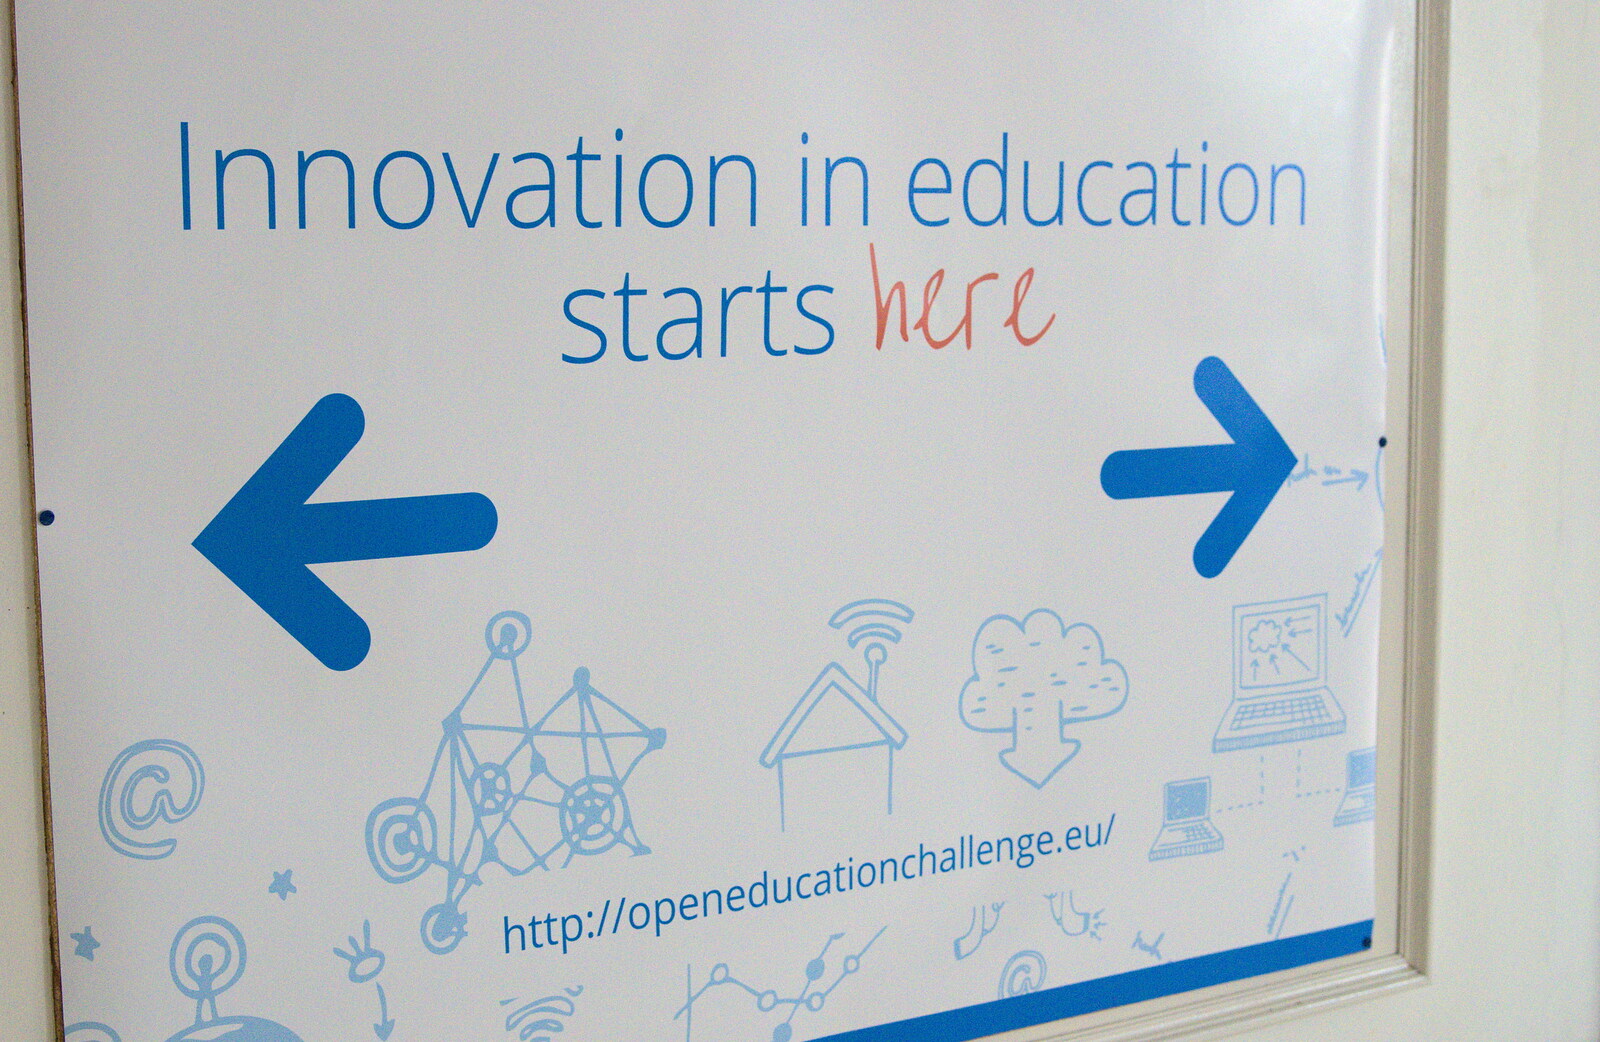 OEC signpost from The Open Education Challenge, Barcelona, Catalonia - 13th July 2014